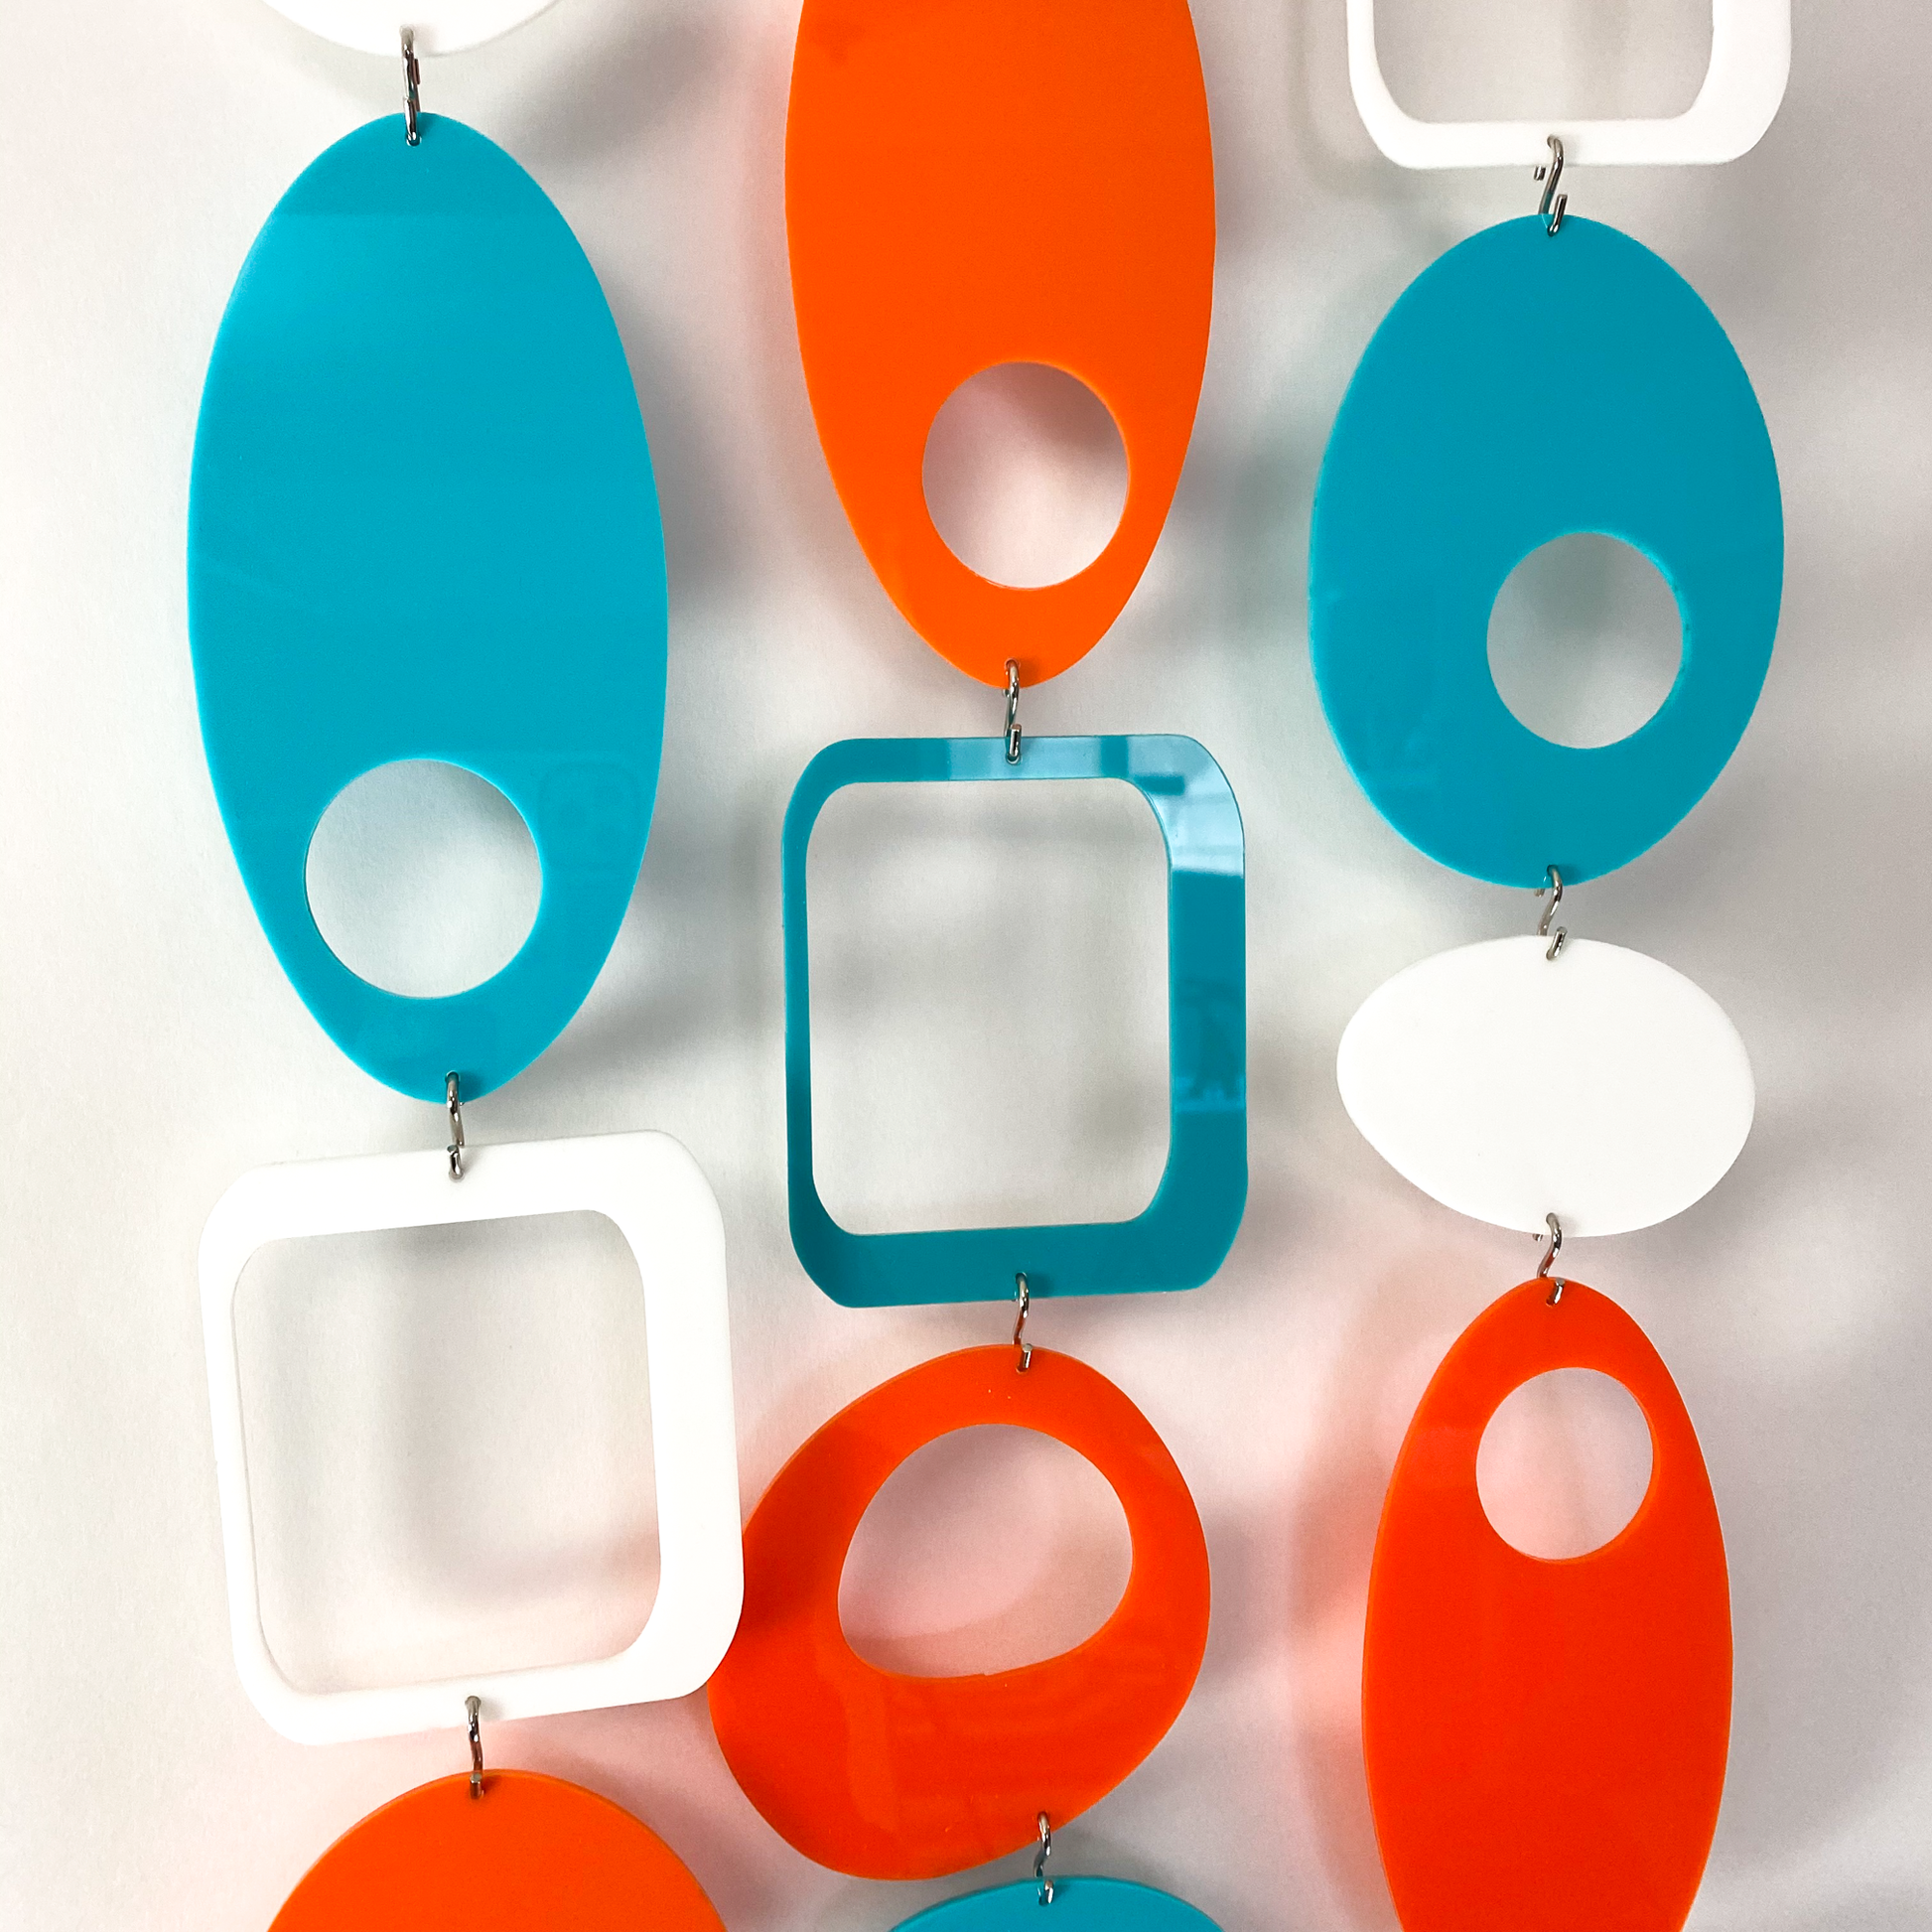 Glossy acrylic Palm Springs Colors of Orange, Aqua, and White - DIY Kit to make room divider, window treatment, wall art, or mobile! by AtomicMobiles.com